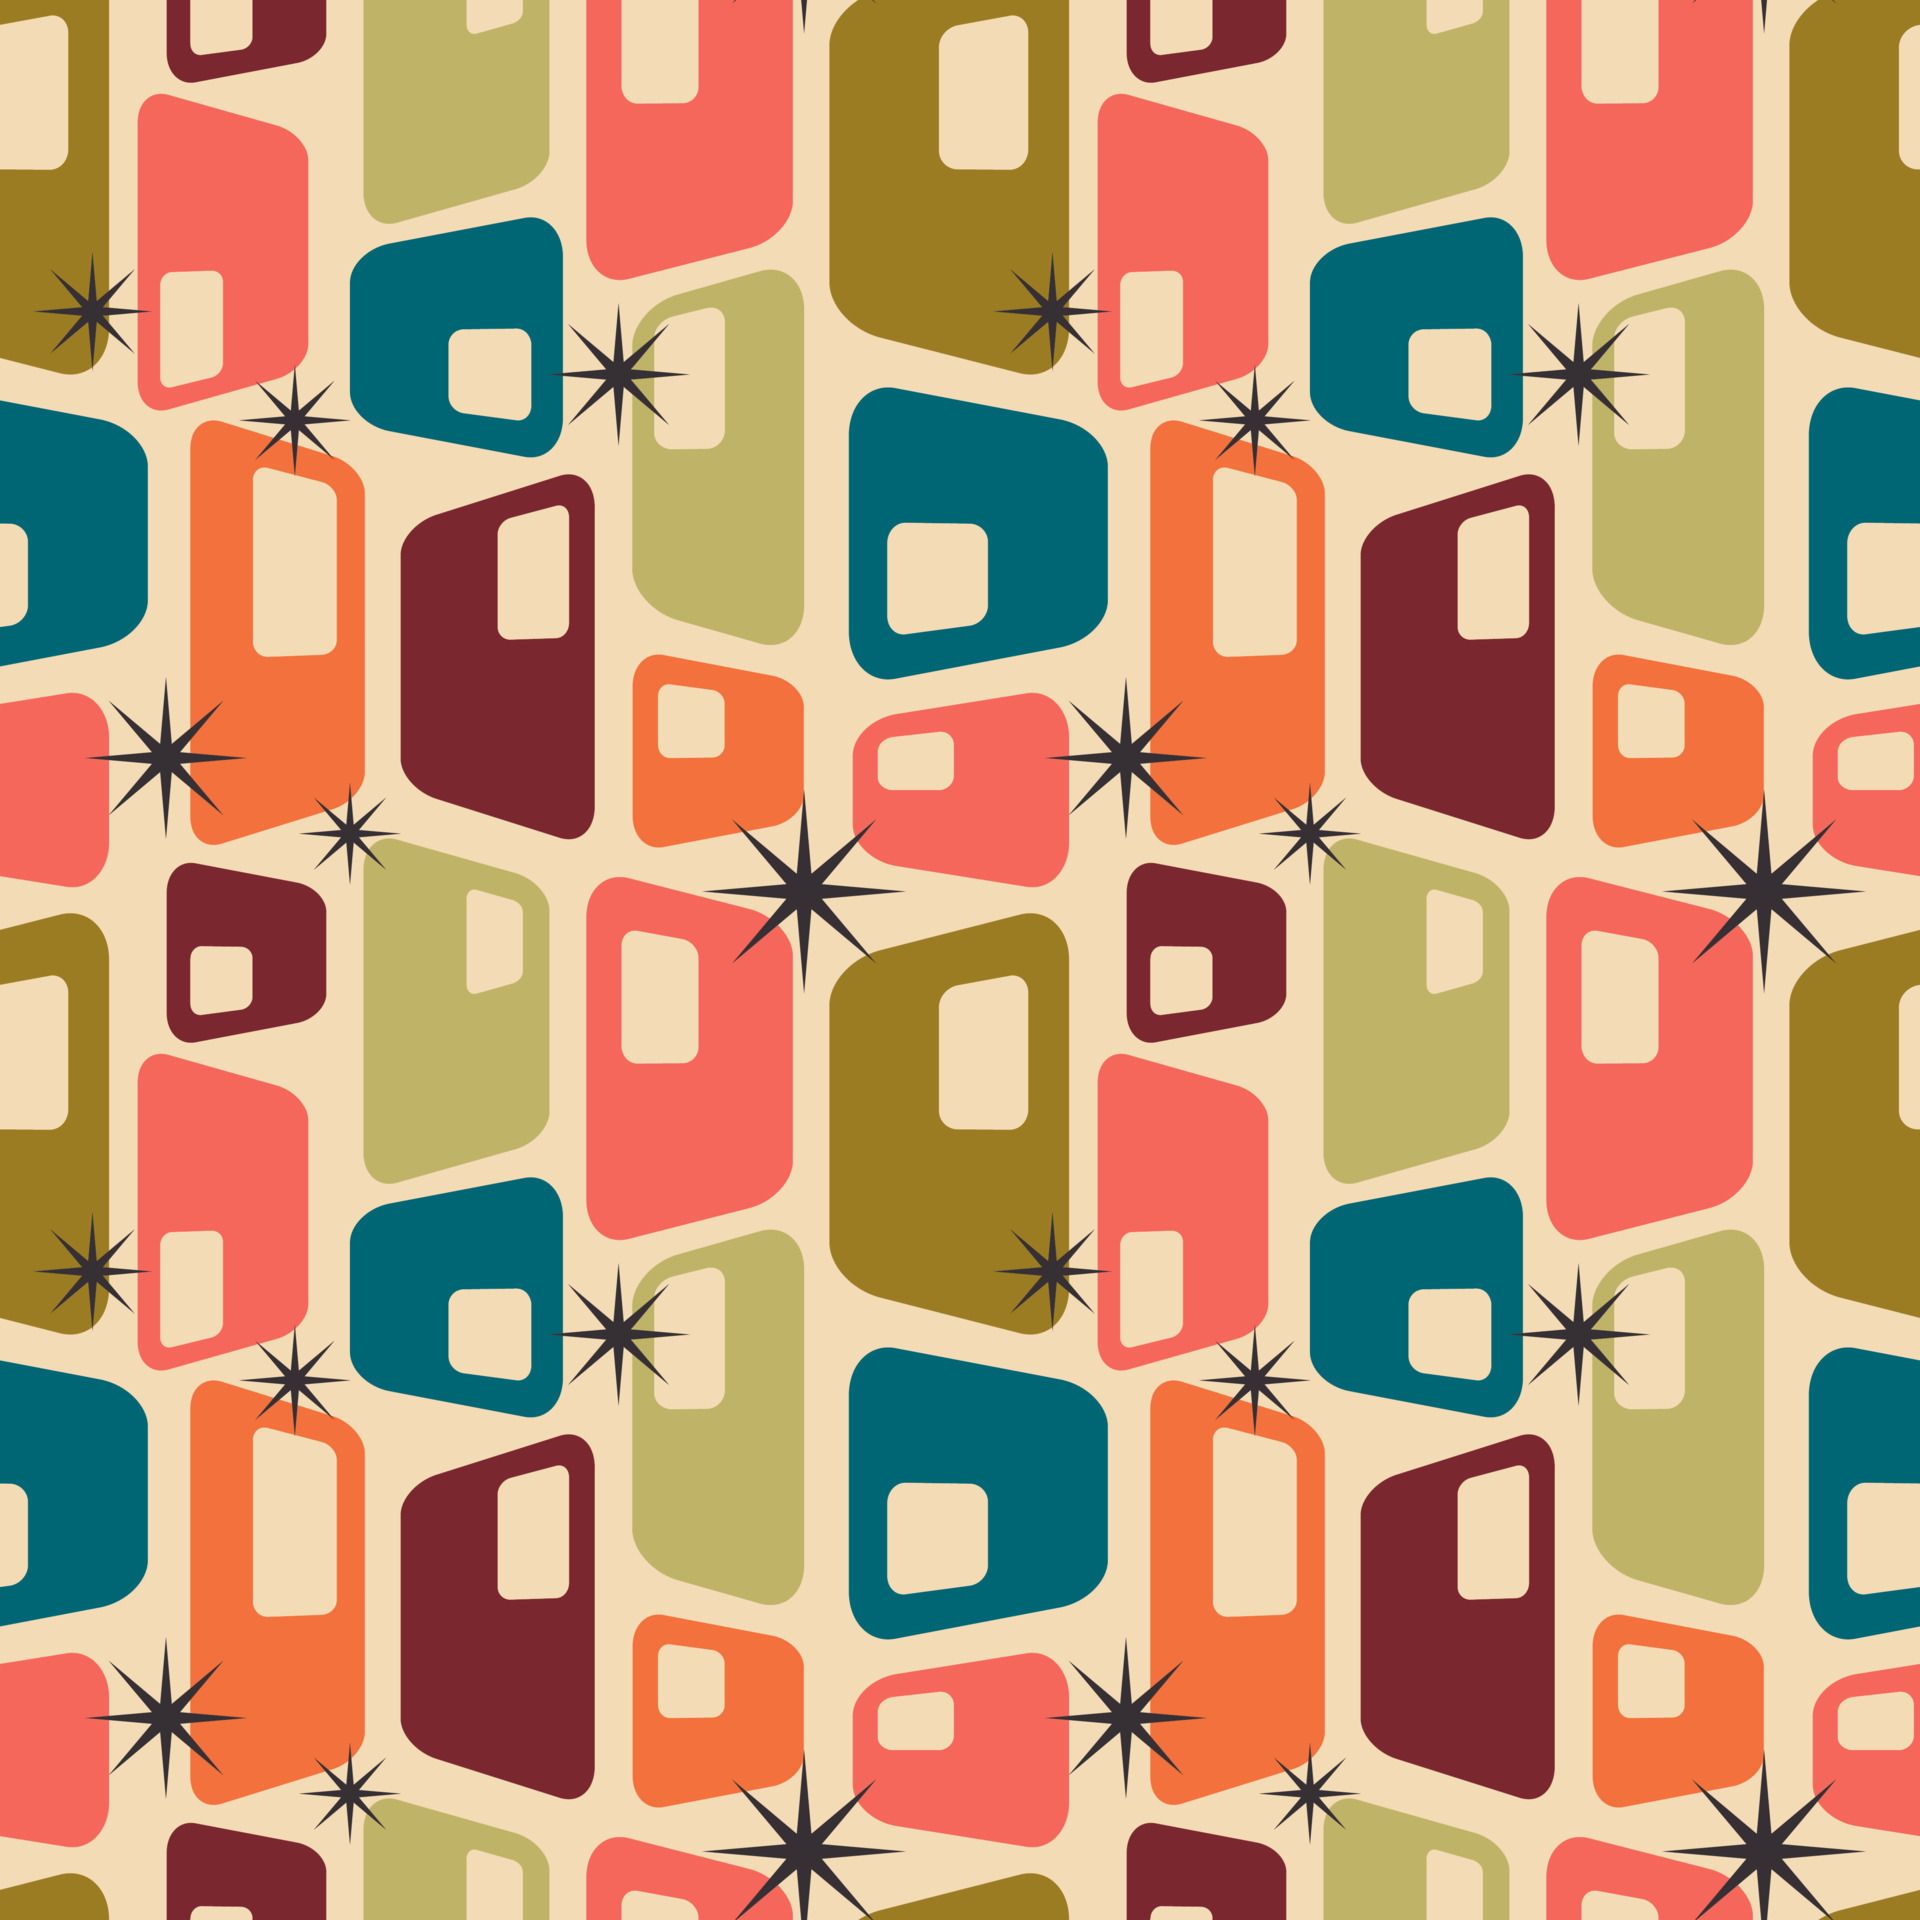 Aesthetic mid century printable seamless pattern with retro design. Decorative 50s, 60s, 70s style Vintage modern background in minimalist mid century style for fabric, wallpaper or wrapping